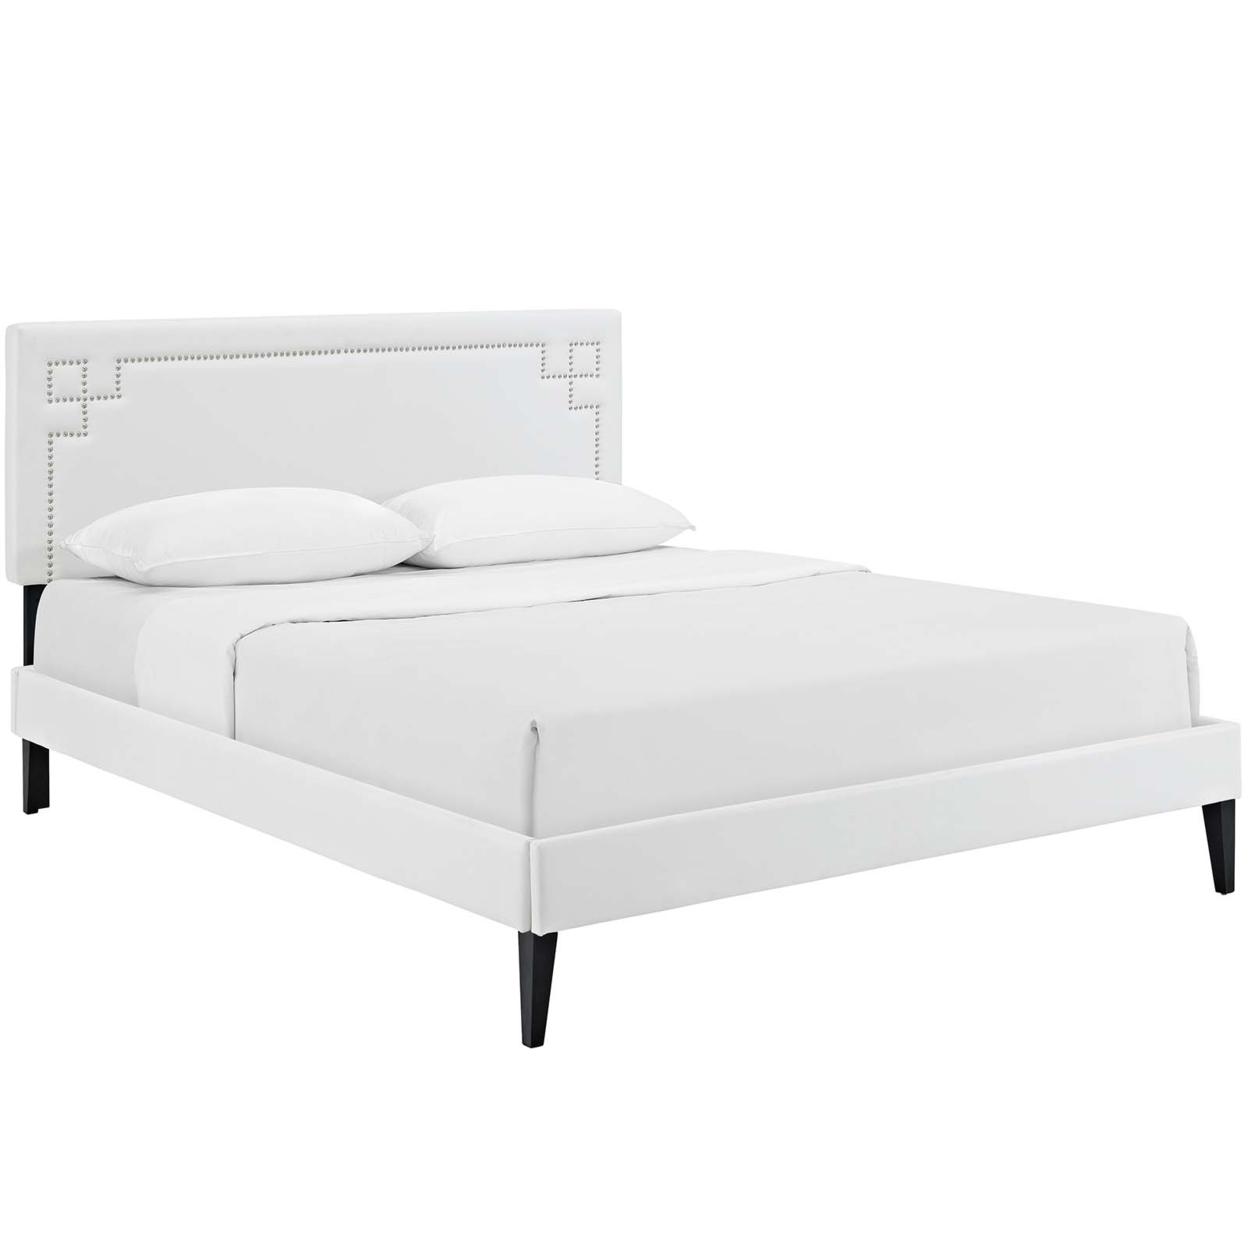 Ruthie Queen Vinyl Platform Bed With Squared Tapered Legs, White